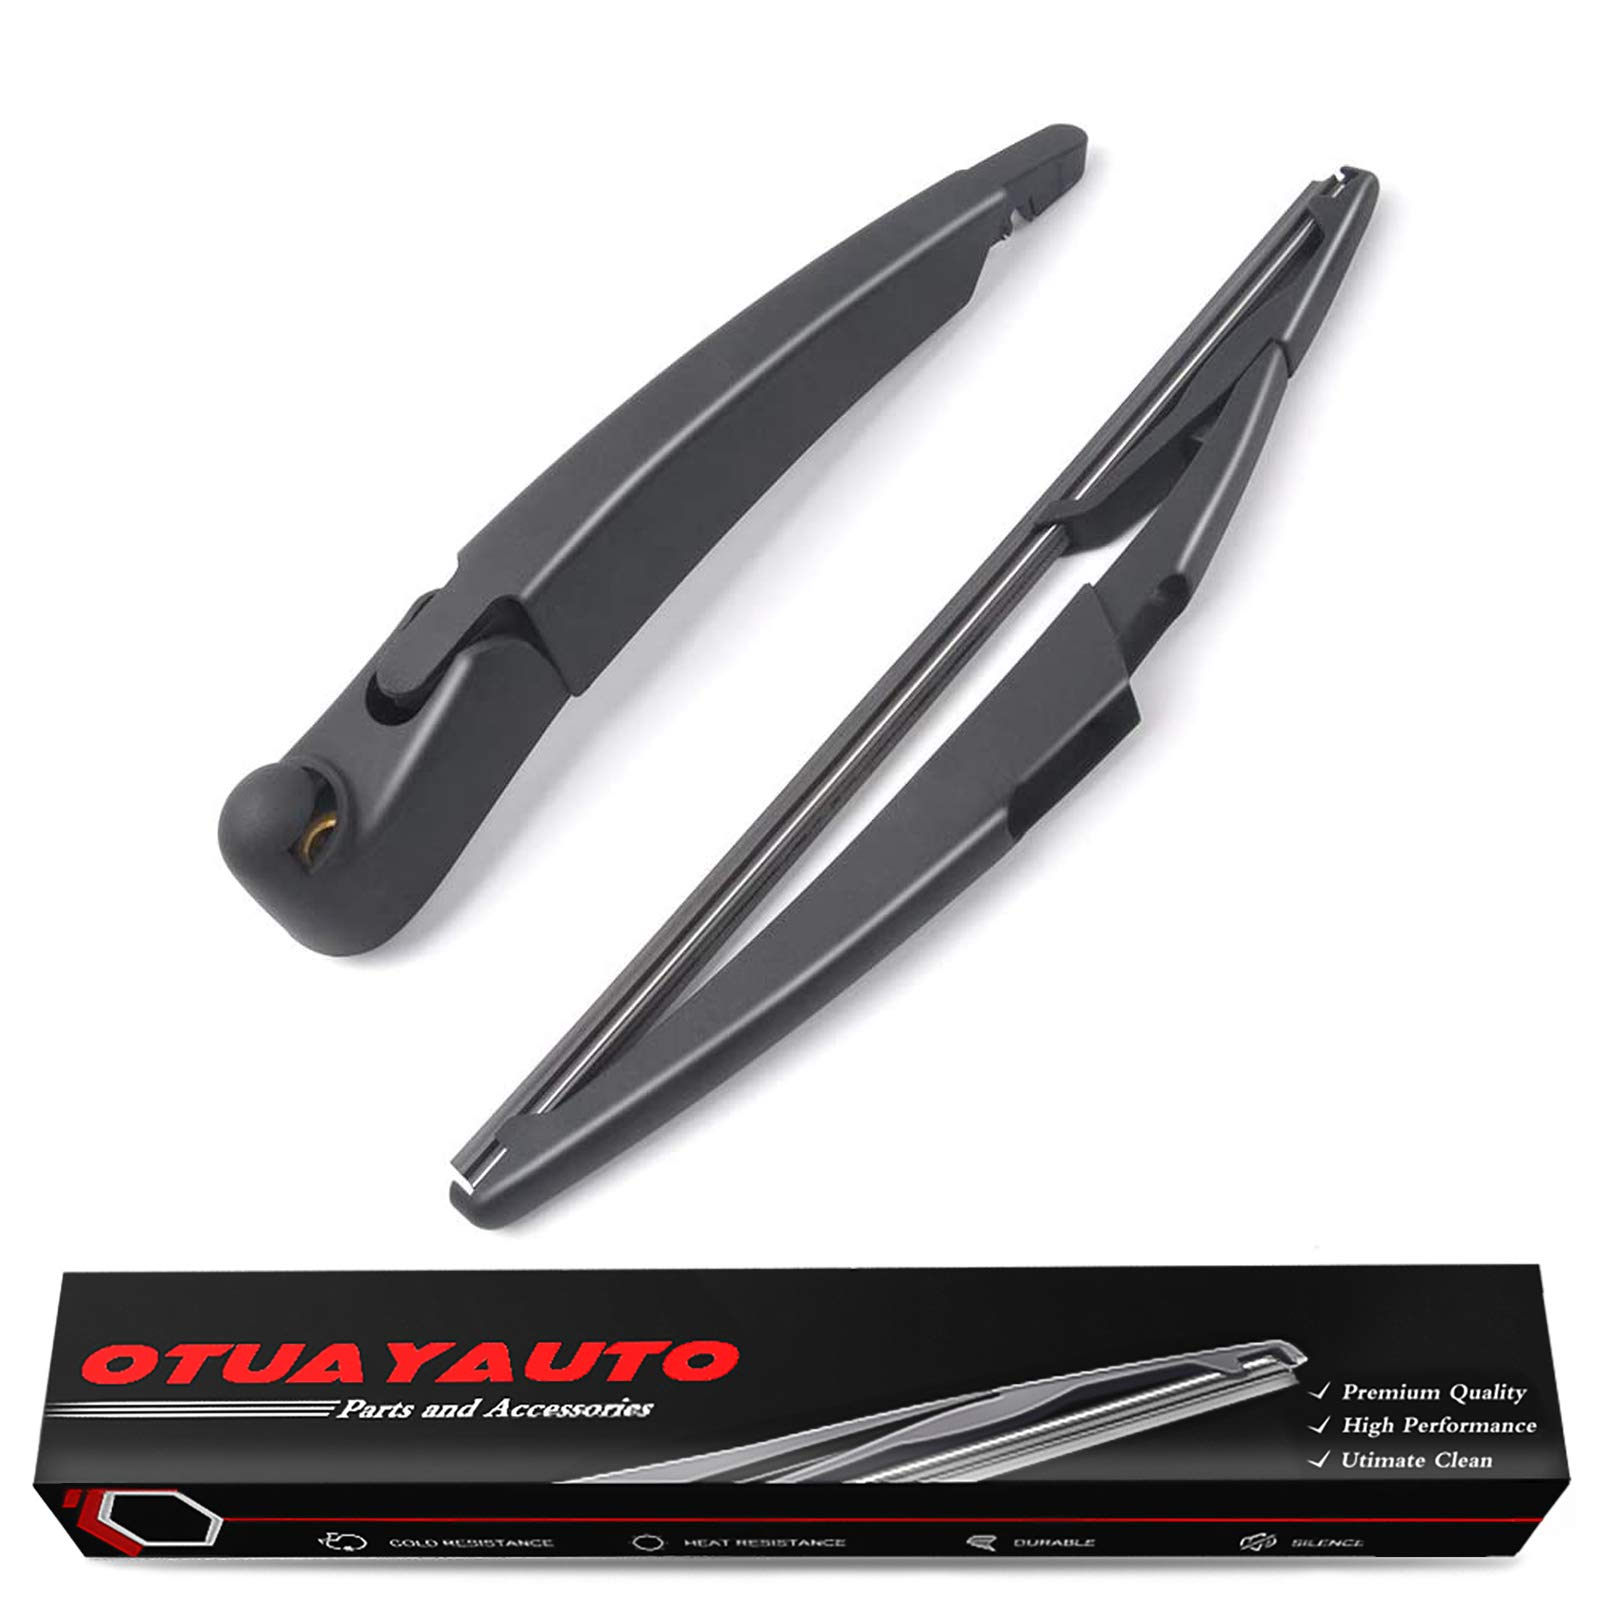 Replacement for Mini Cooper R56 2007-2015, Cooper Countryman R60 2011-2016 Vehicles - Rear Windshield Back Wiper Arm Blade Set - OTUAYAUTO Factory OEM 61622754287